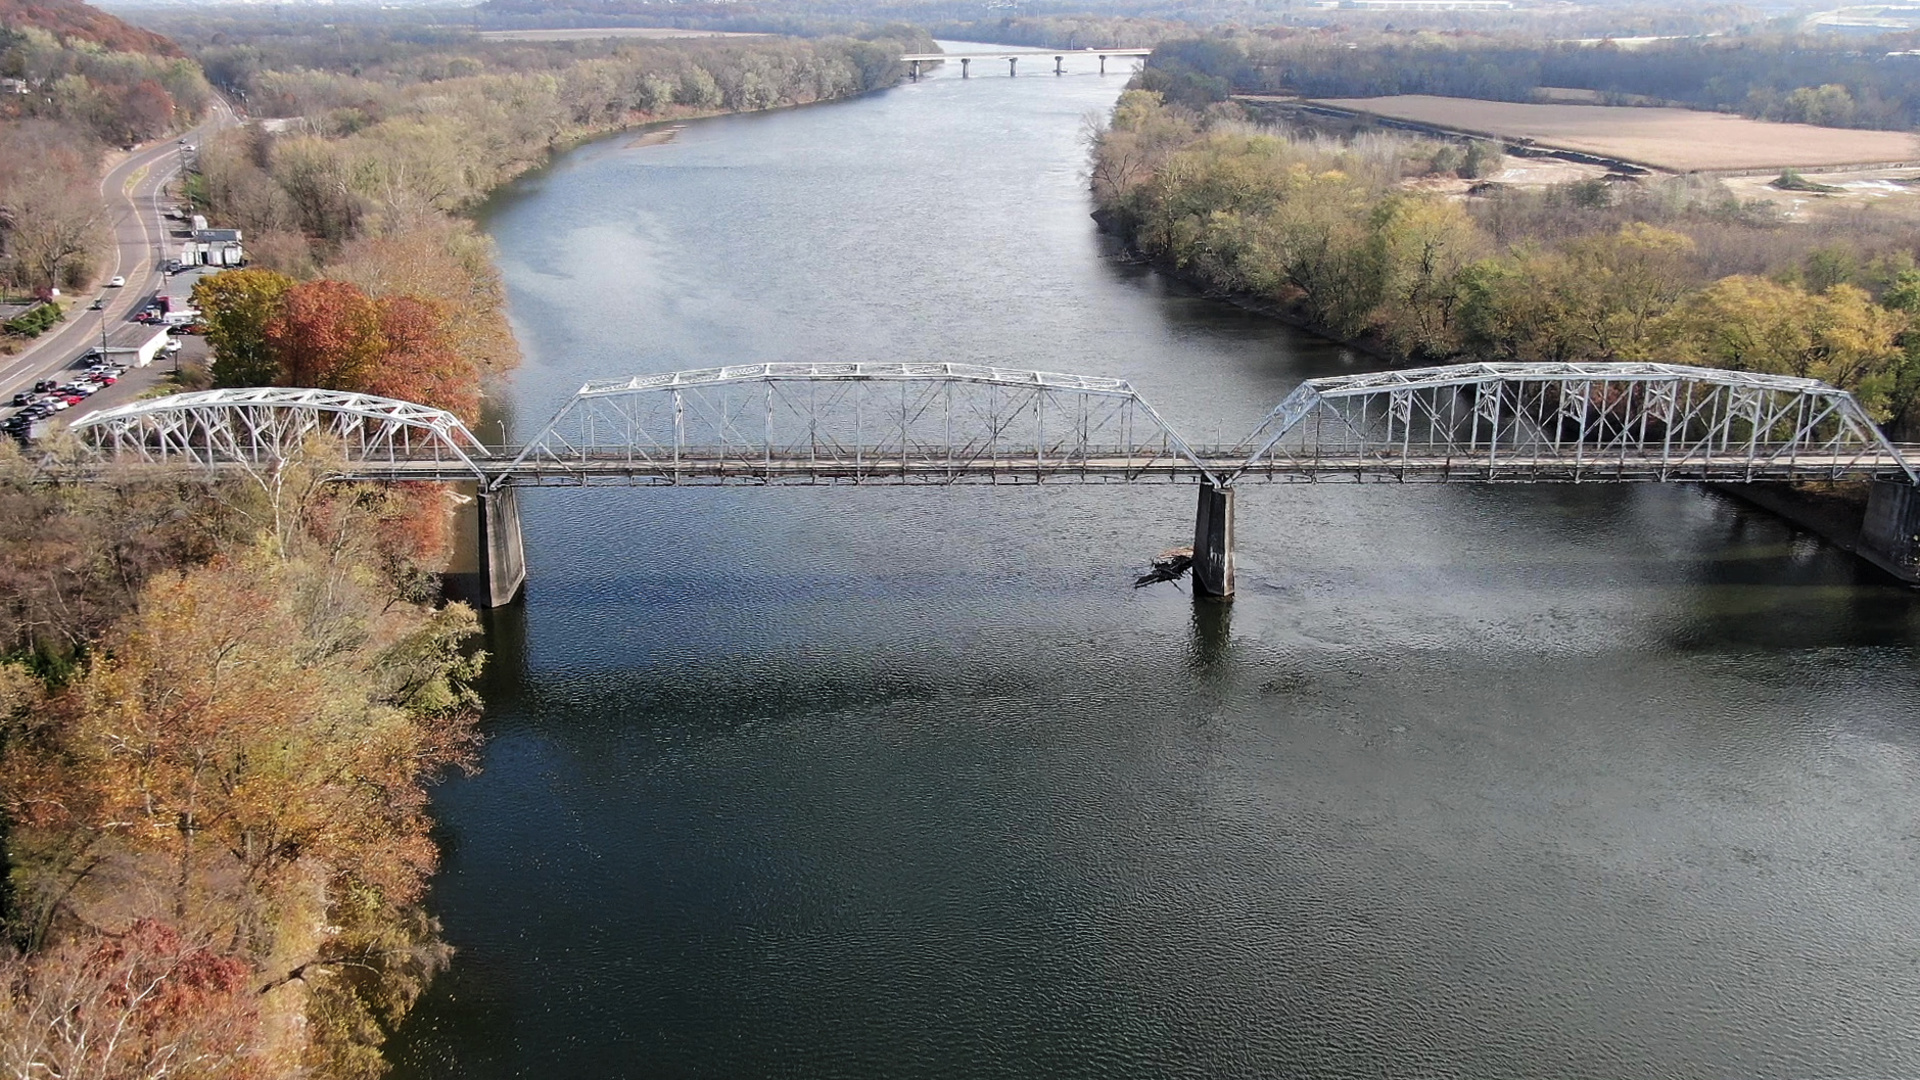 The span connecting Nanticoke and West Nanticoke now has a lower weight limit, county officials said on Wednesday.